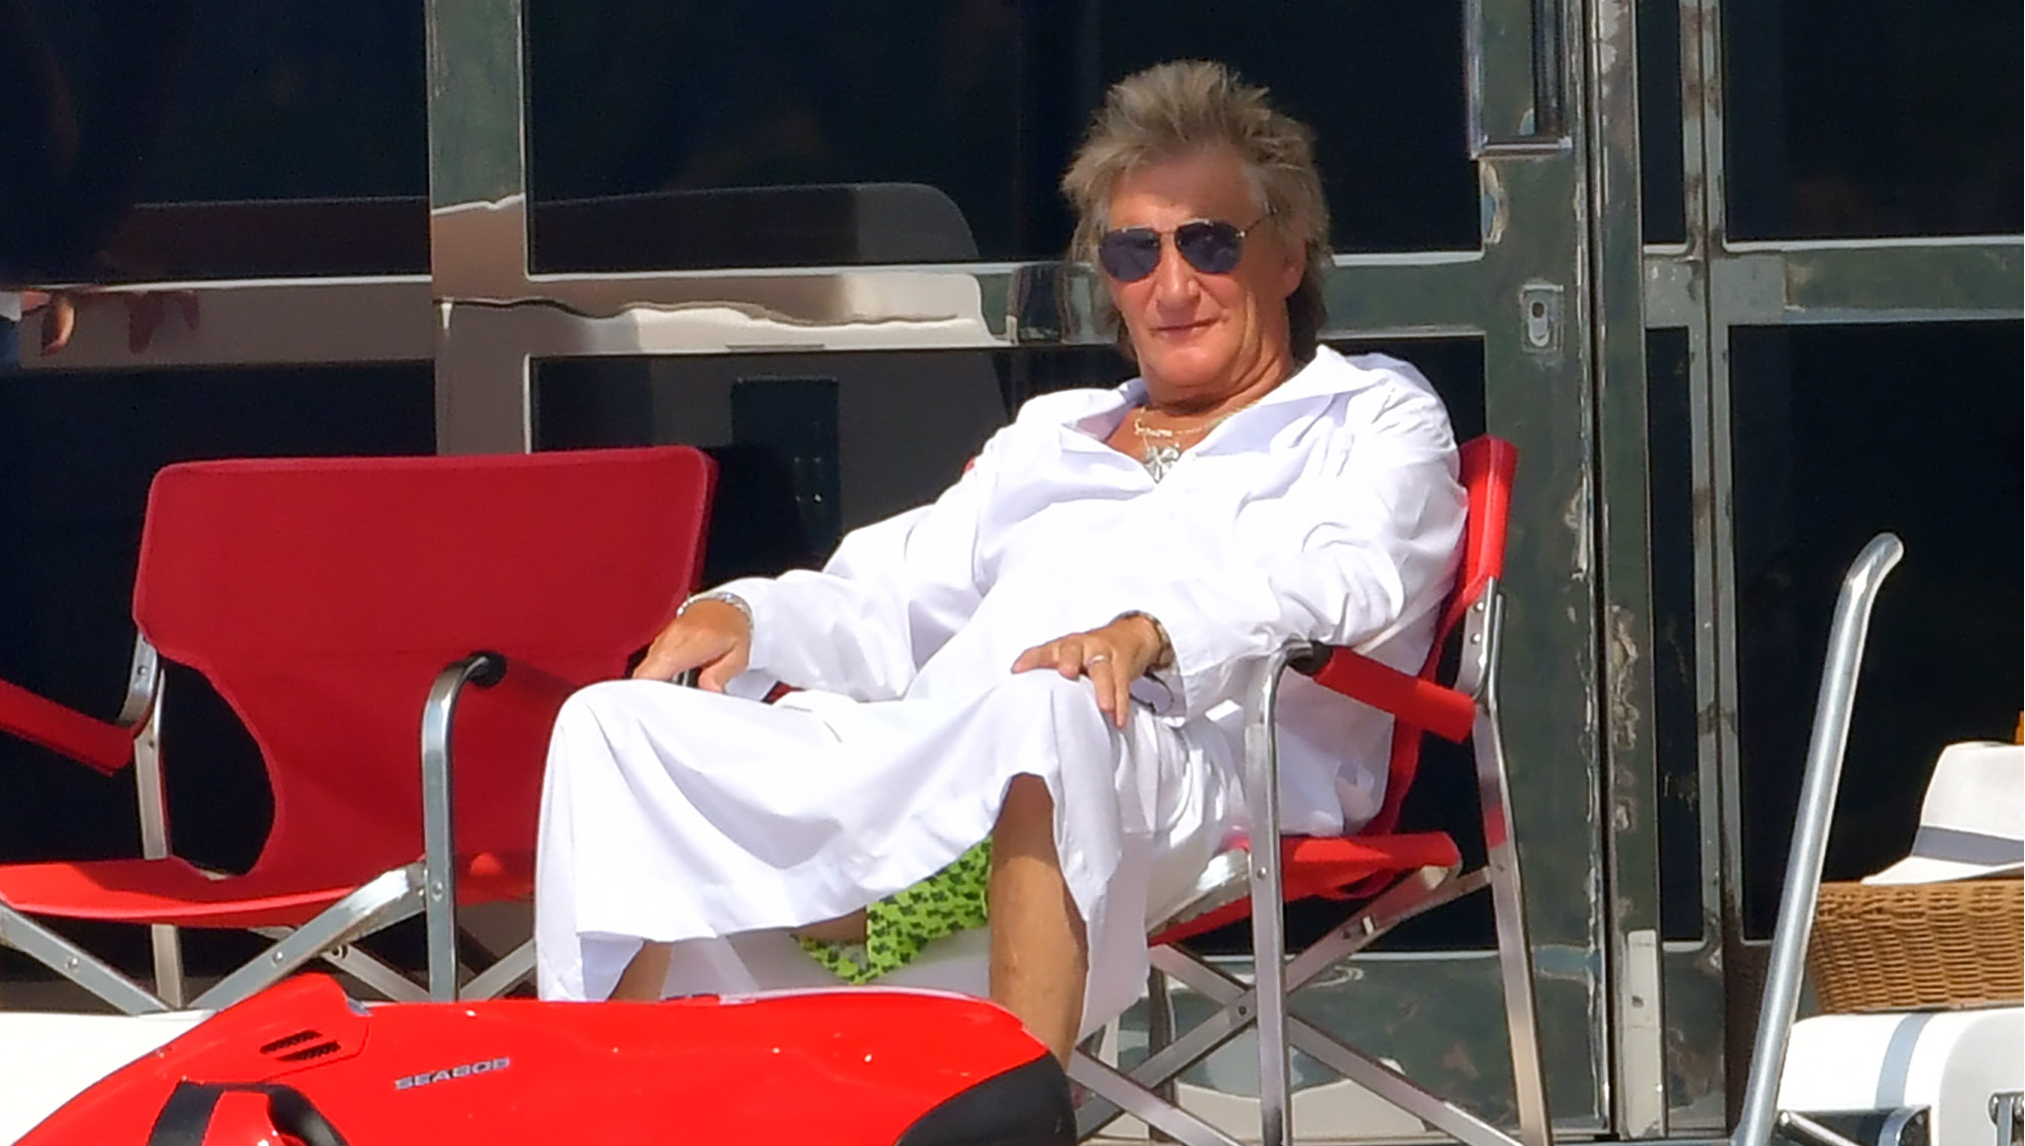 Rod Stewart Taps Into ‘Emotion’ During Vacation On Mega Yacht